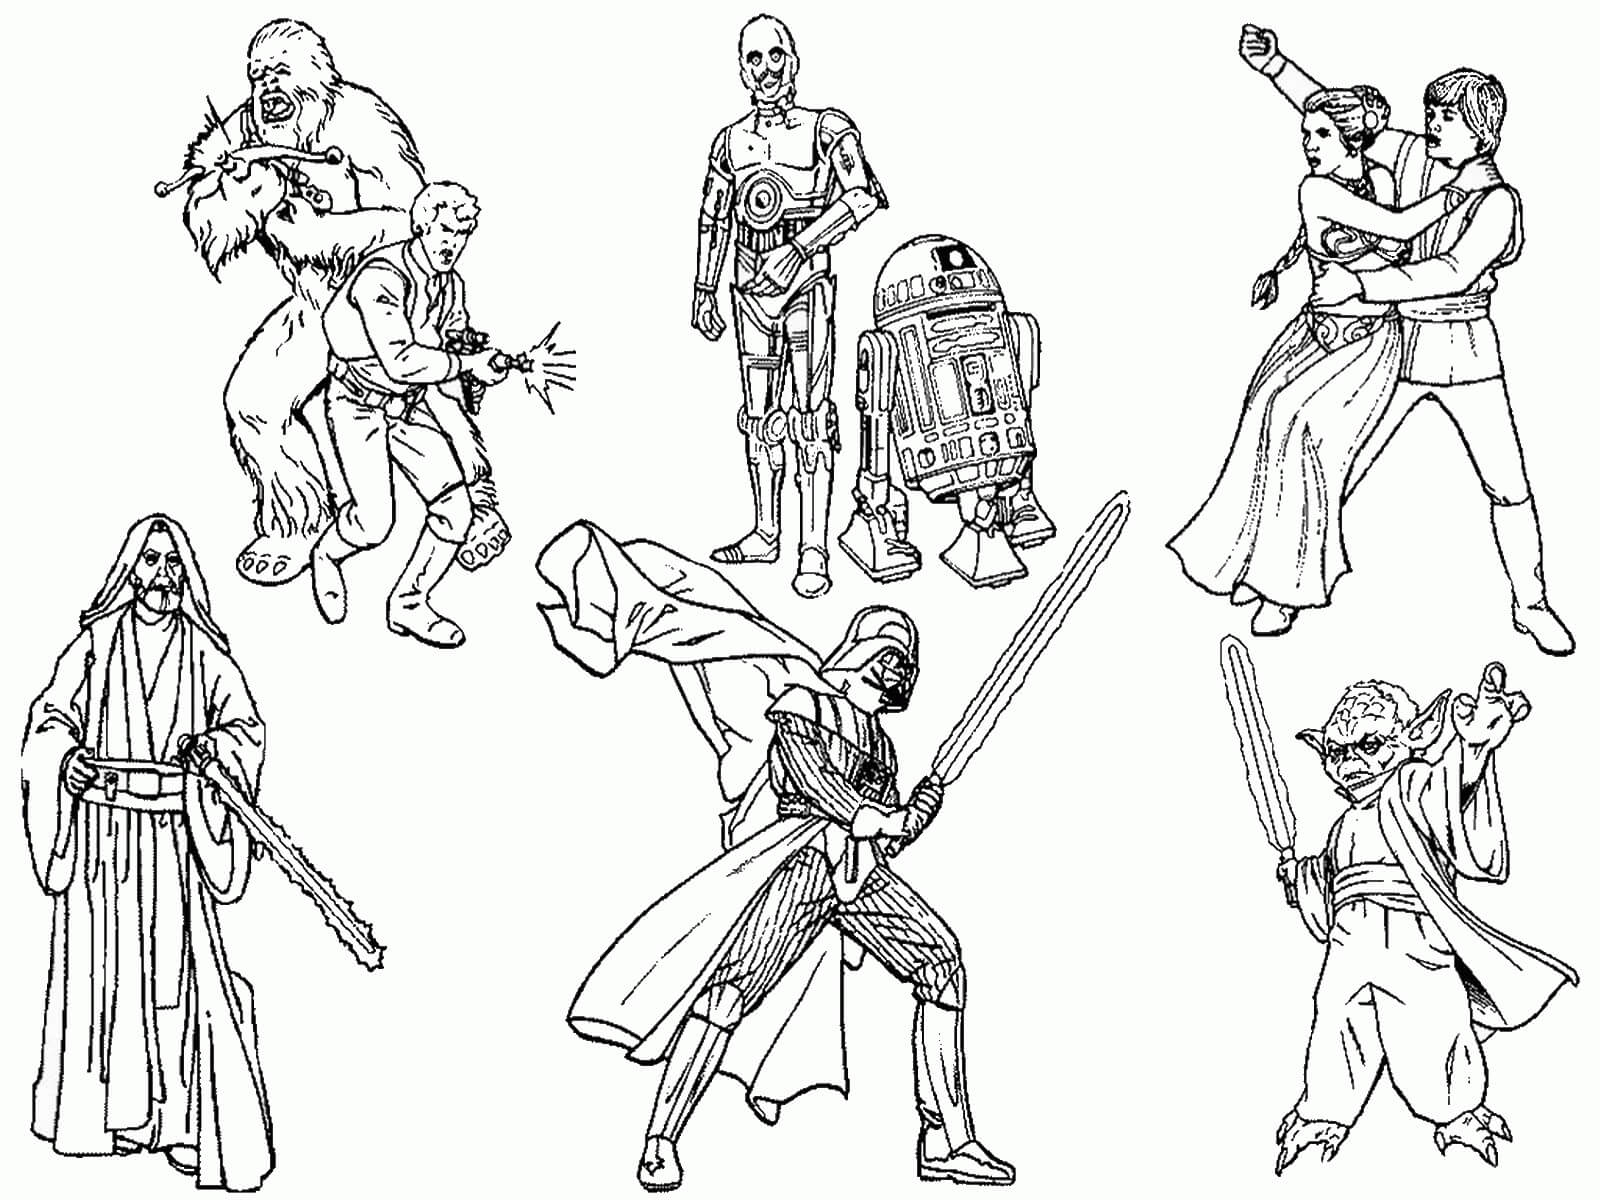 Star Wars coloring page